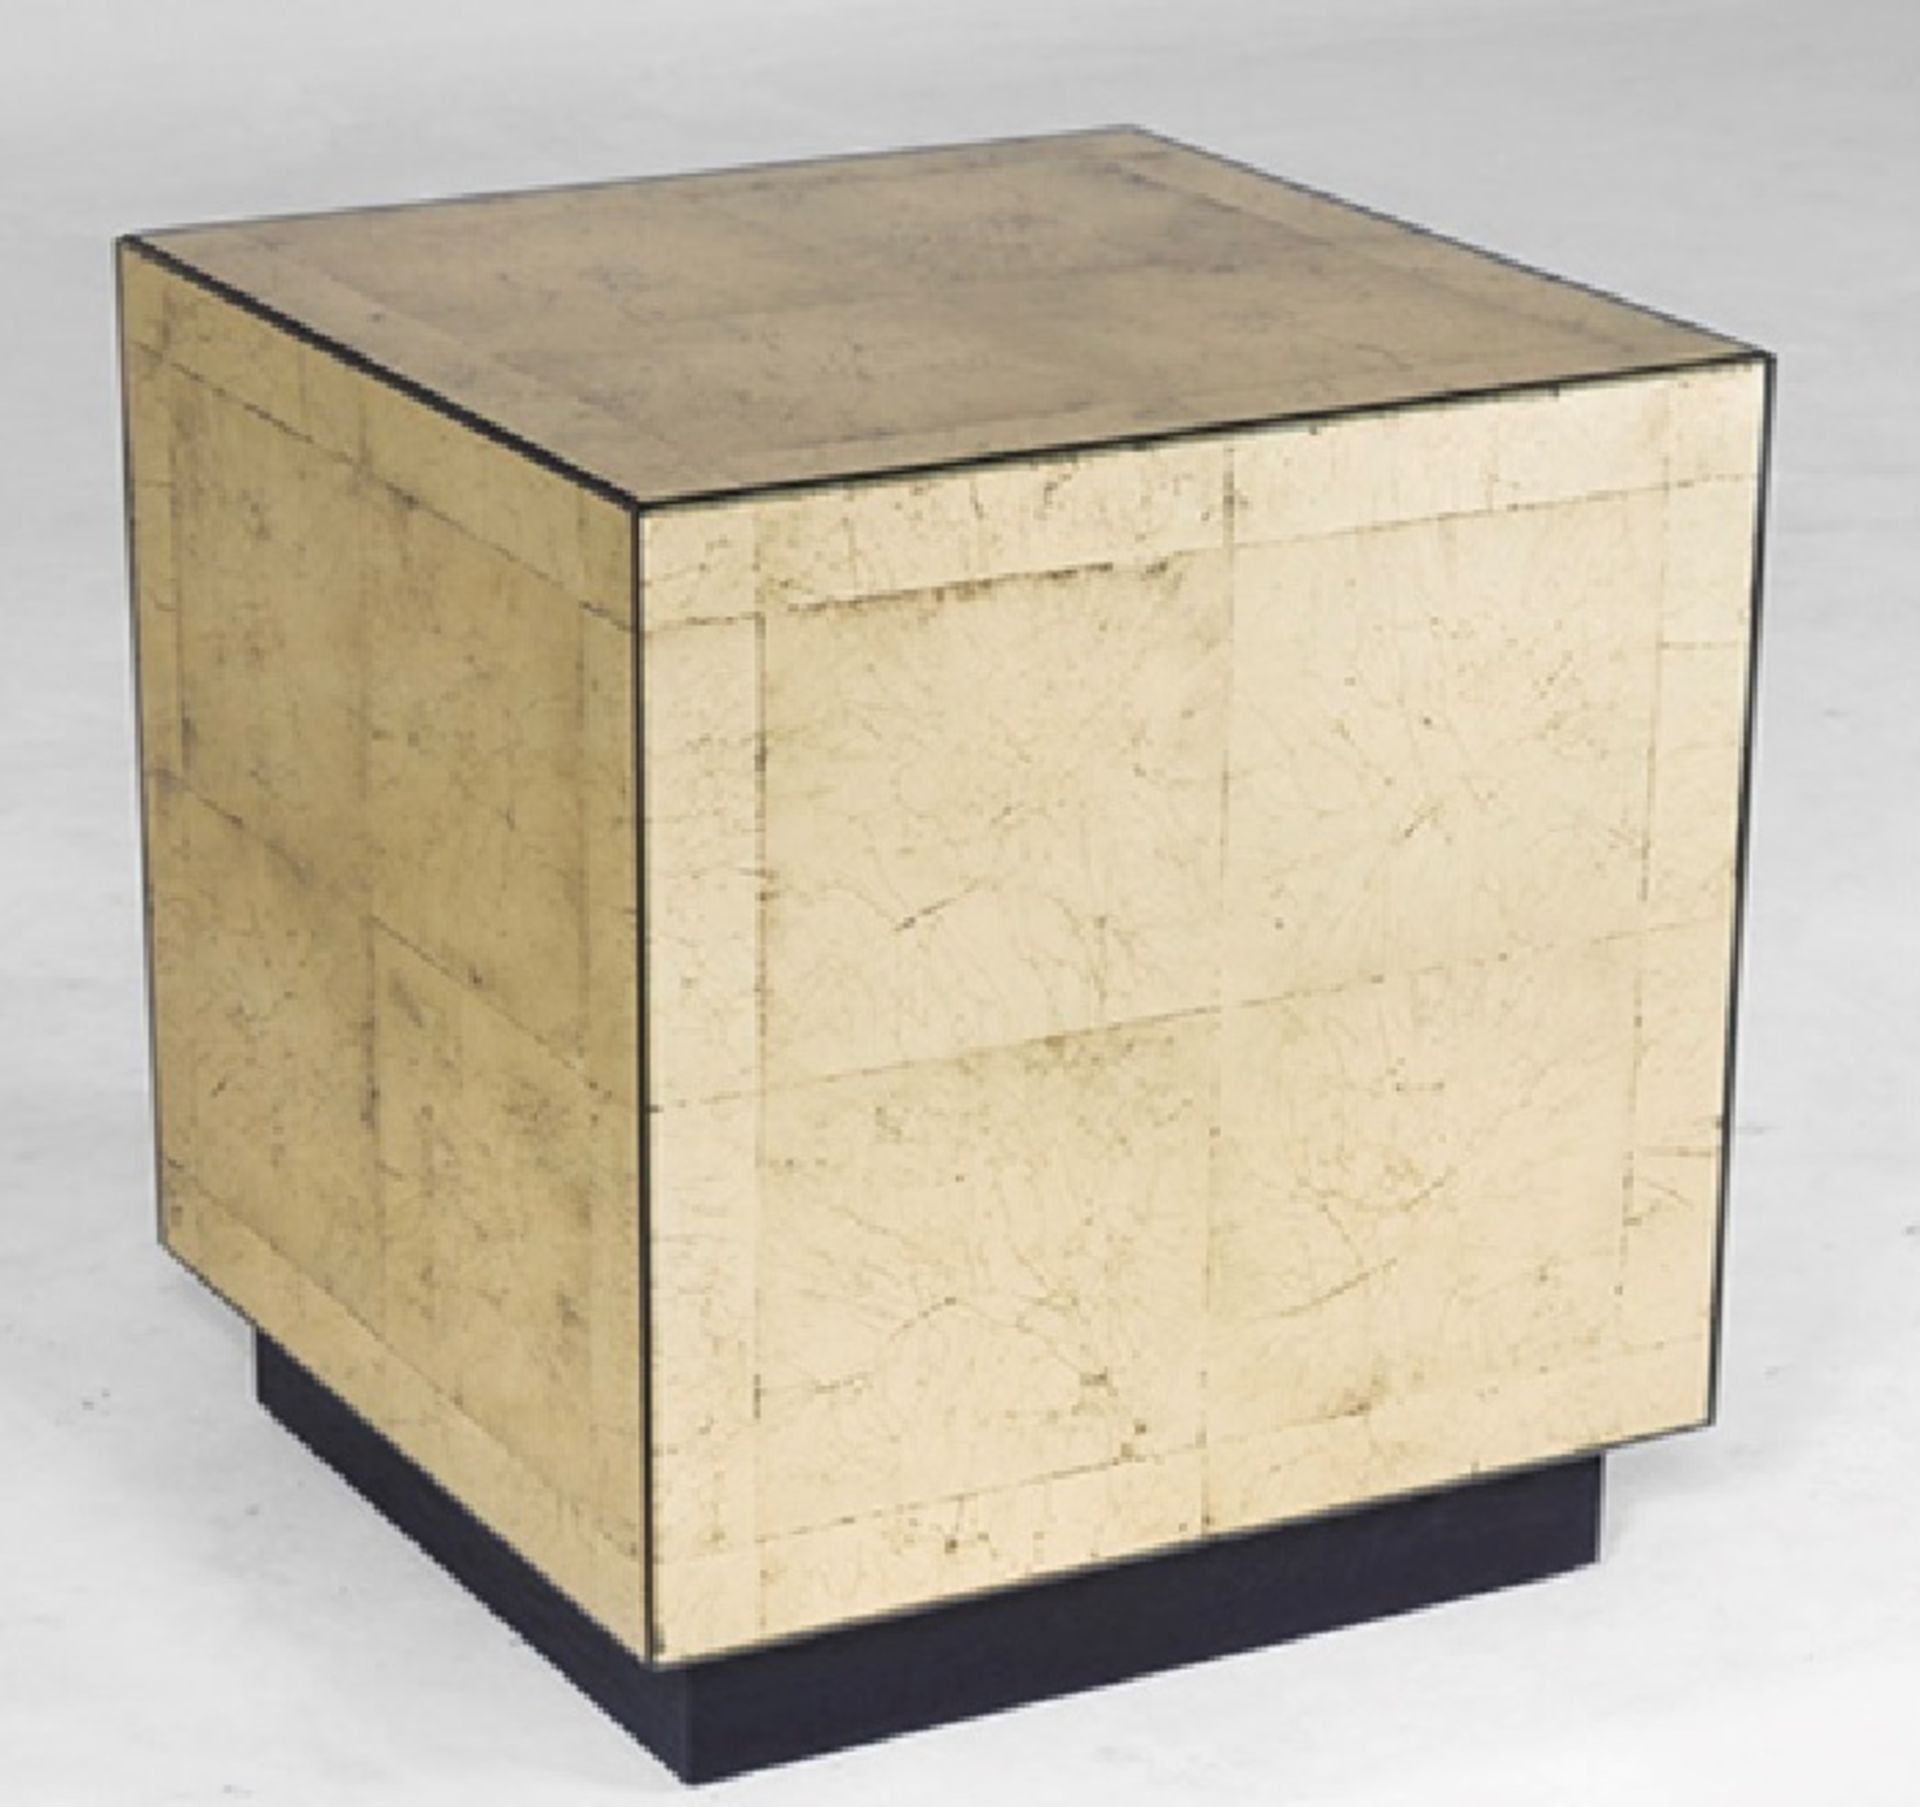 Gatsby Side Table The Gatsby Side Table Displays A Cubic Form With Hand-Applied Gilt Leaf Under